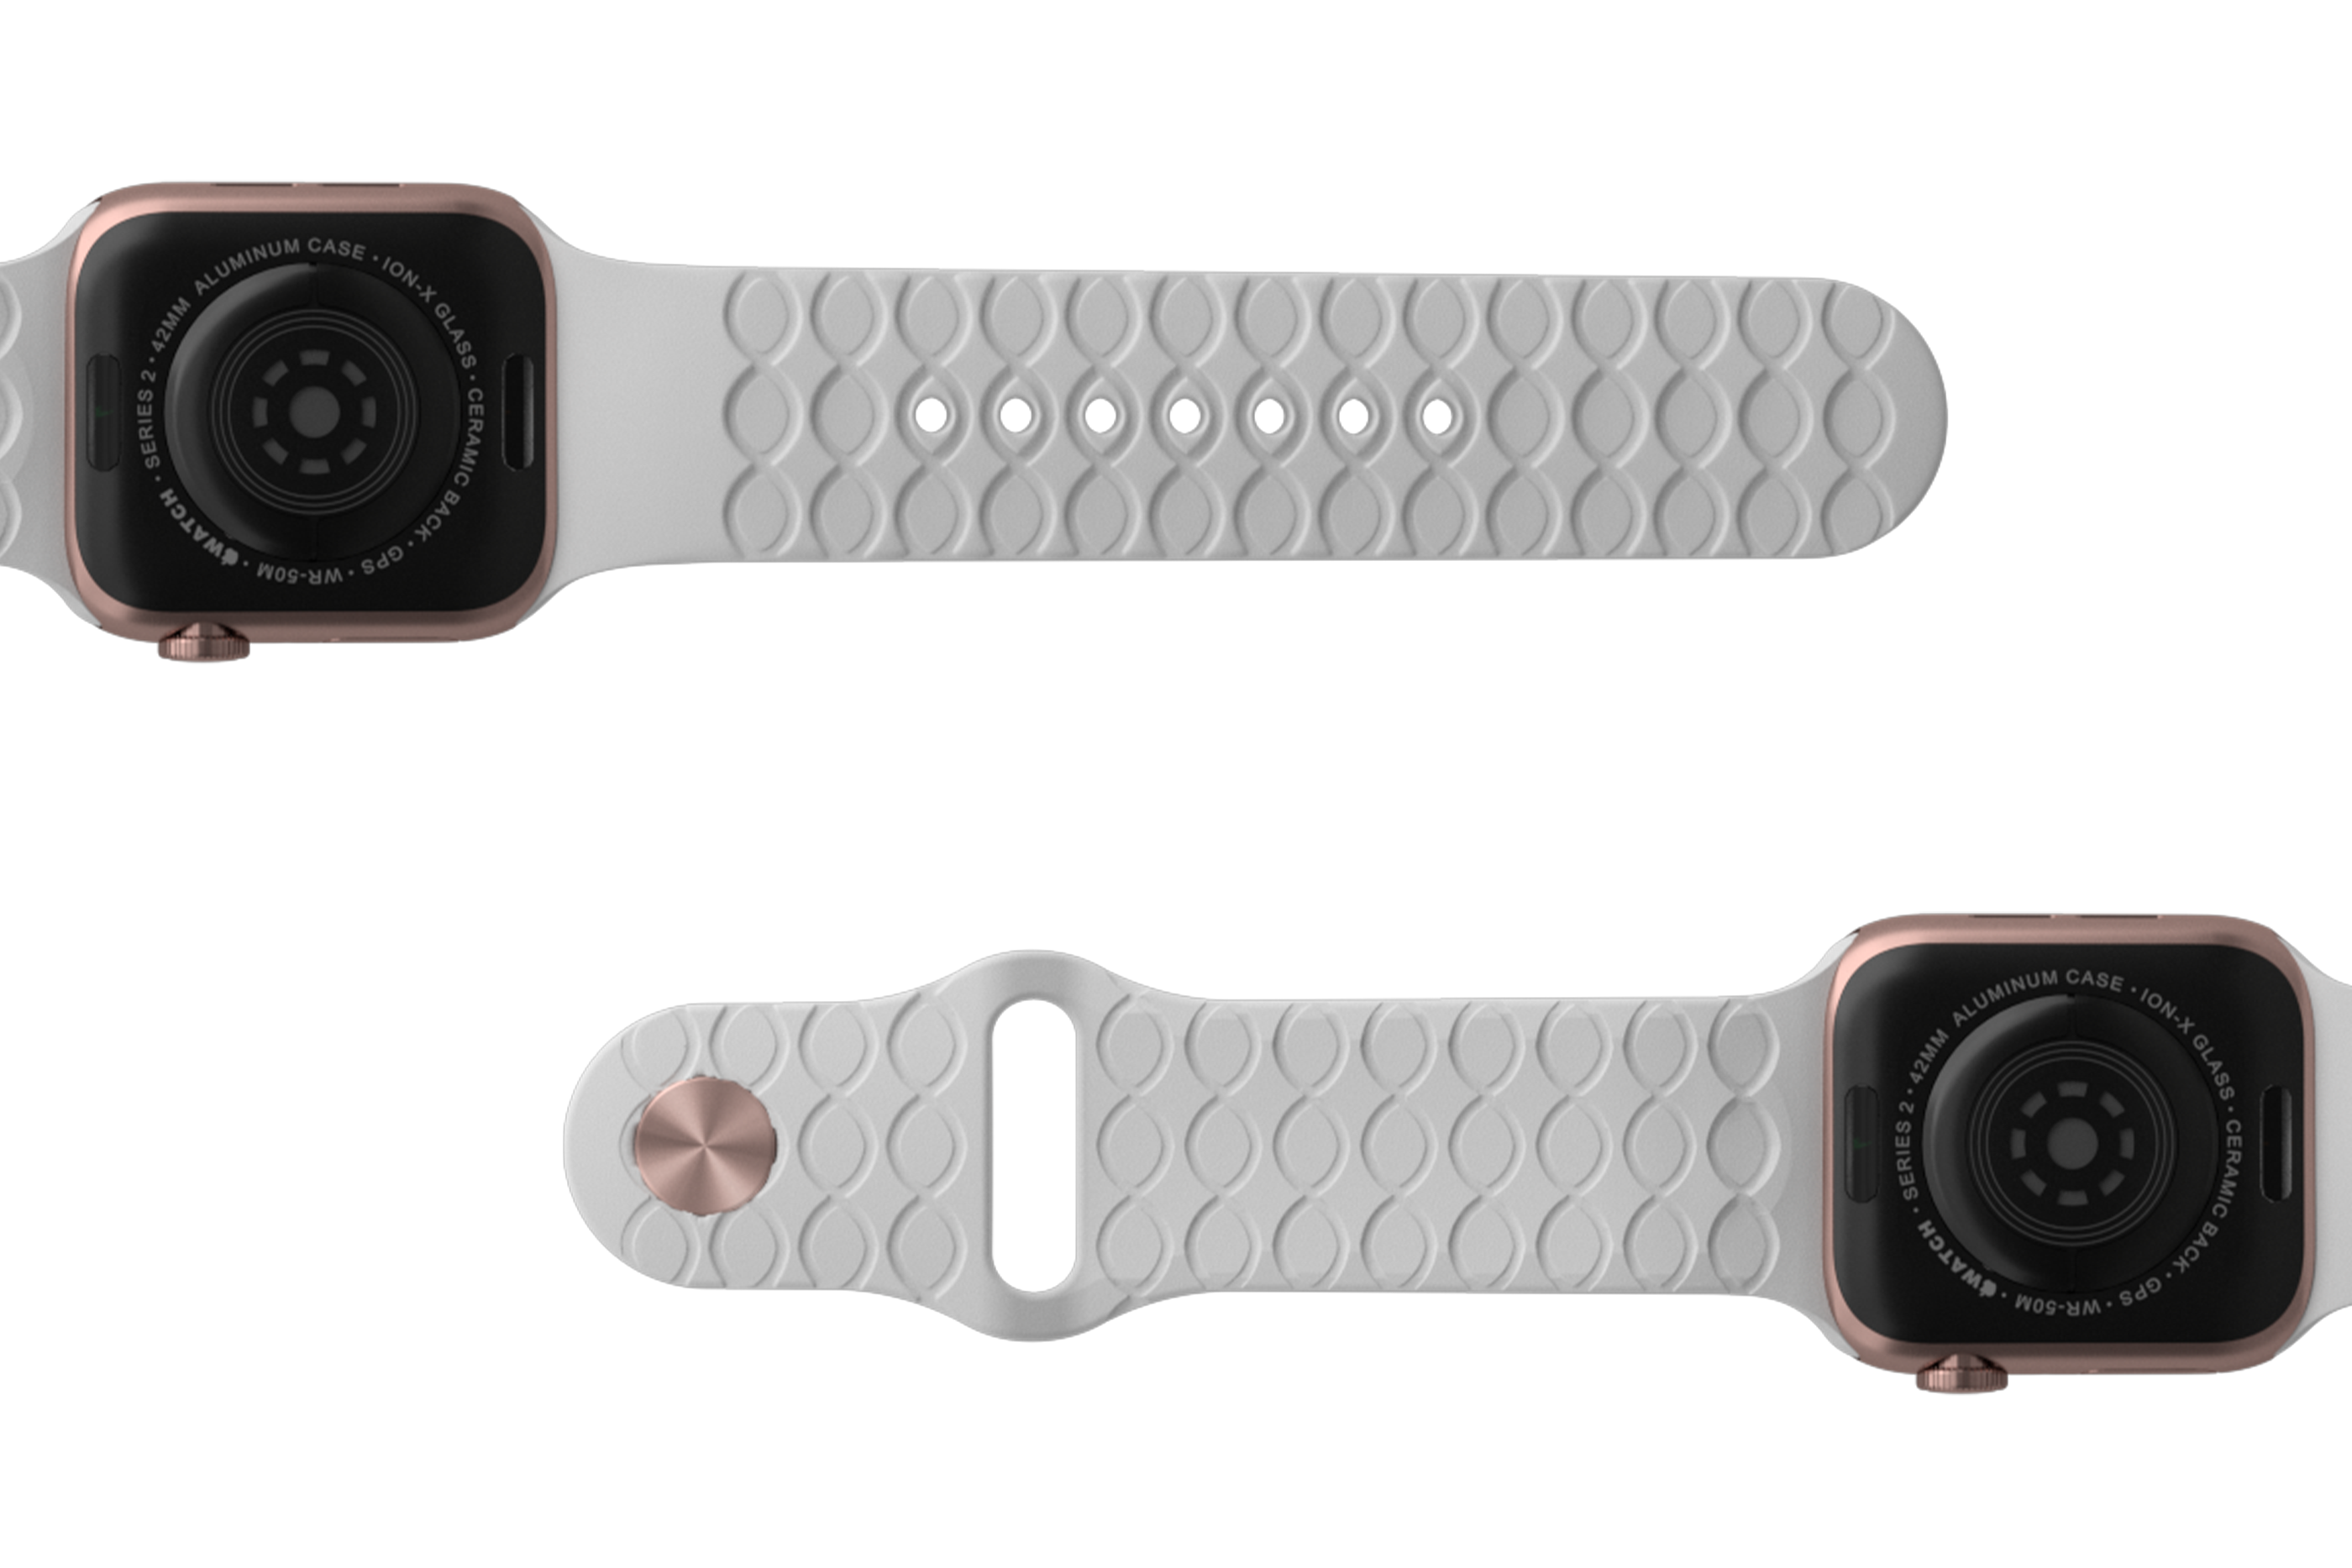 Solid White Apple watch band with rose gold hardware viewed bottom up